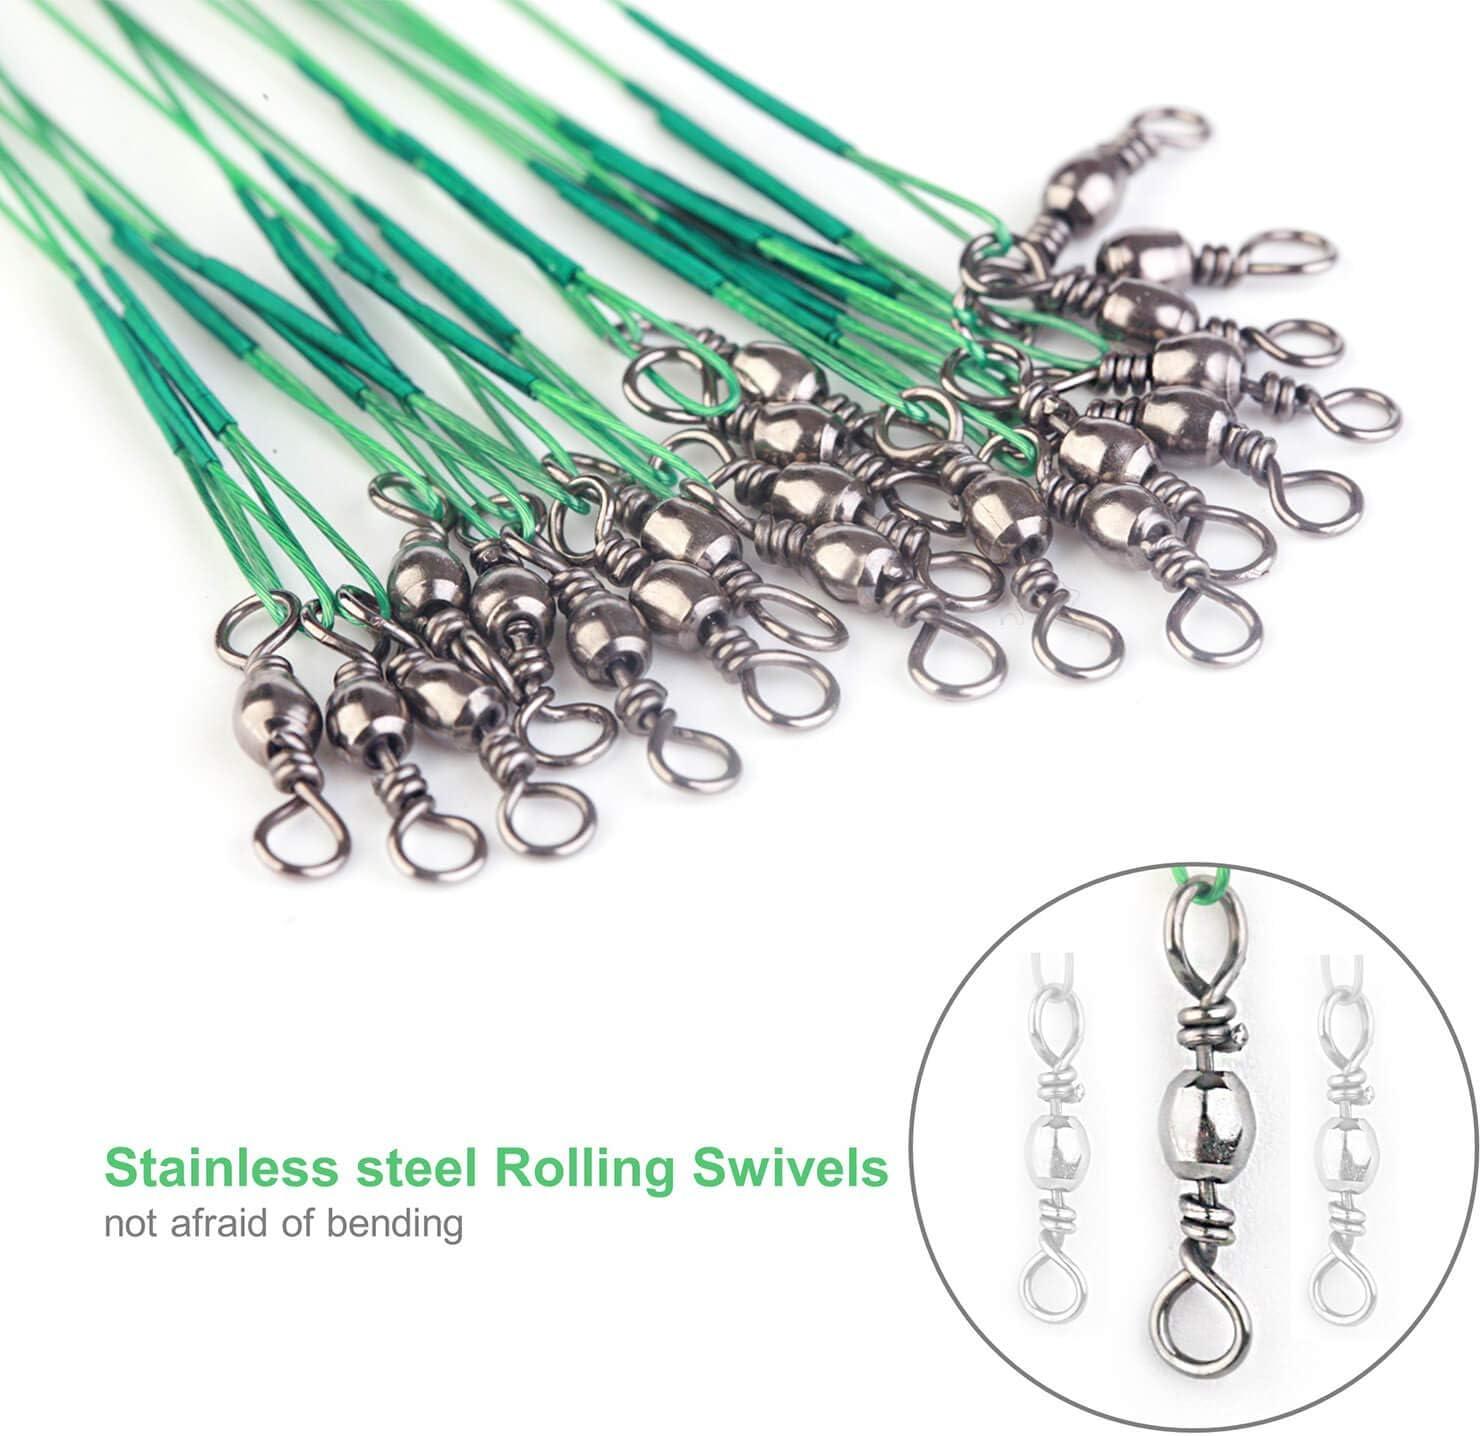  Tackle Crafters Stainless Steel Fishing Leaders - Pack of 12 Wire  Leaders for Fishing Saltwater, Fishing Wire Leader, Steel Leader - Fishing  Leaders with Swivels : Sports & Outdoors